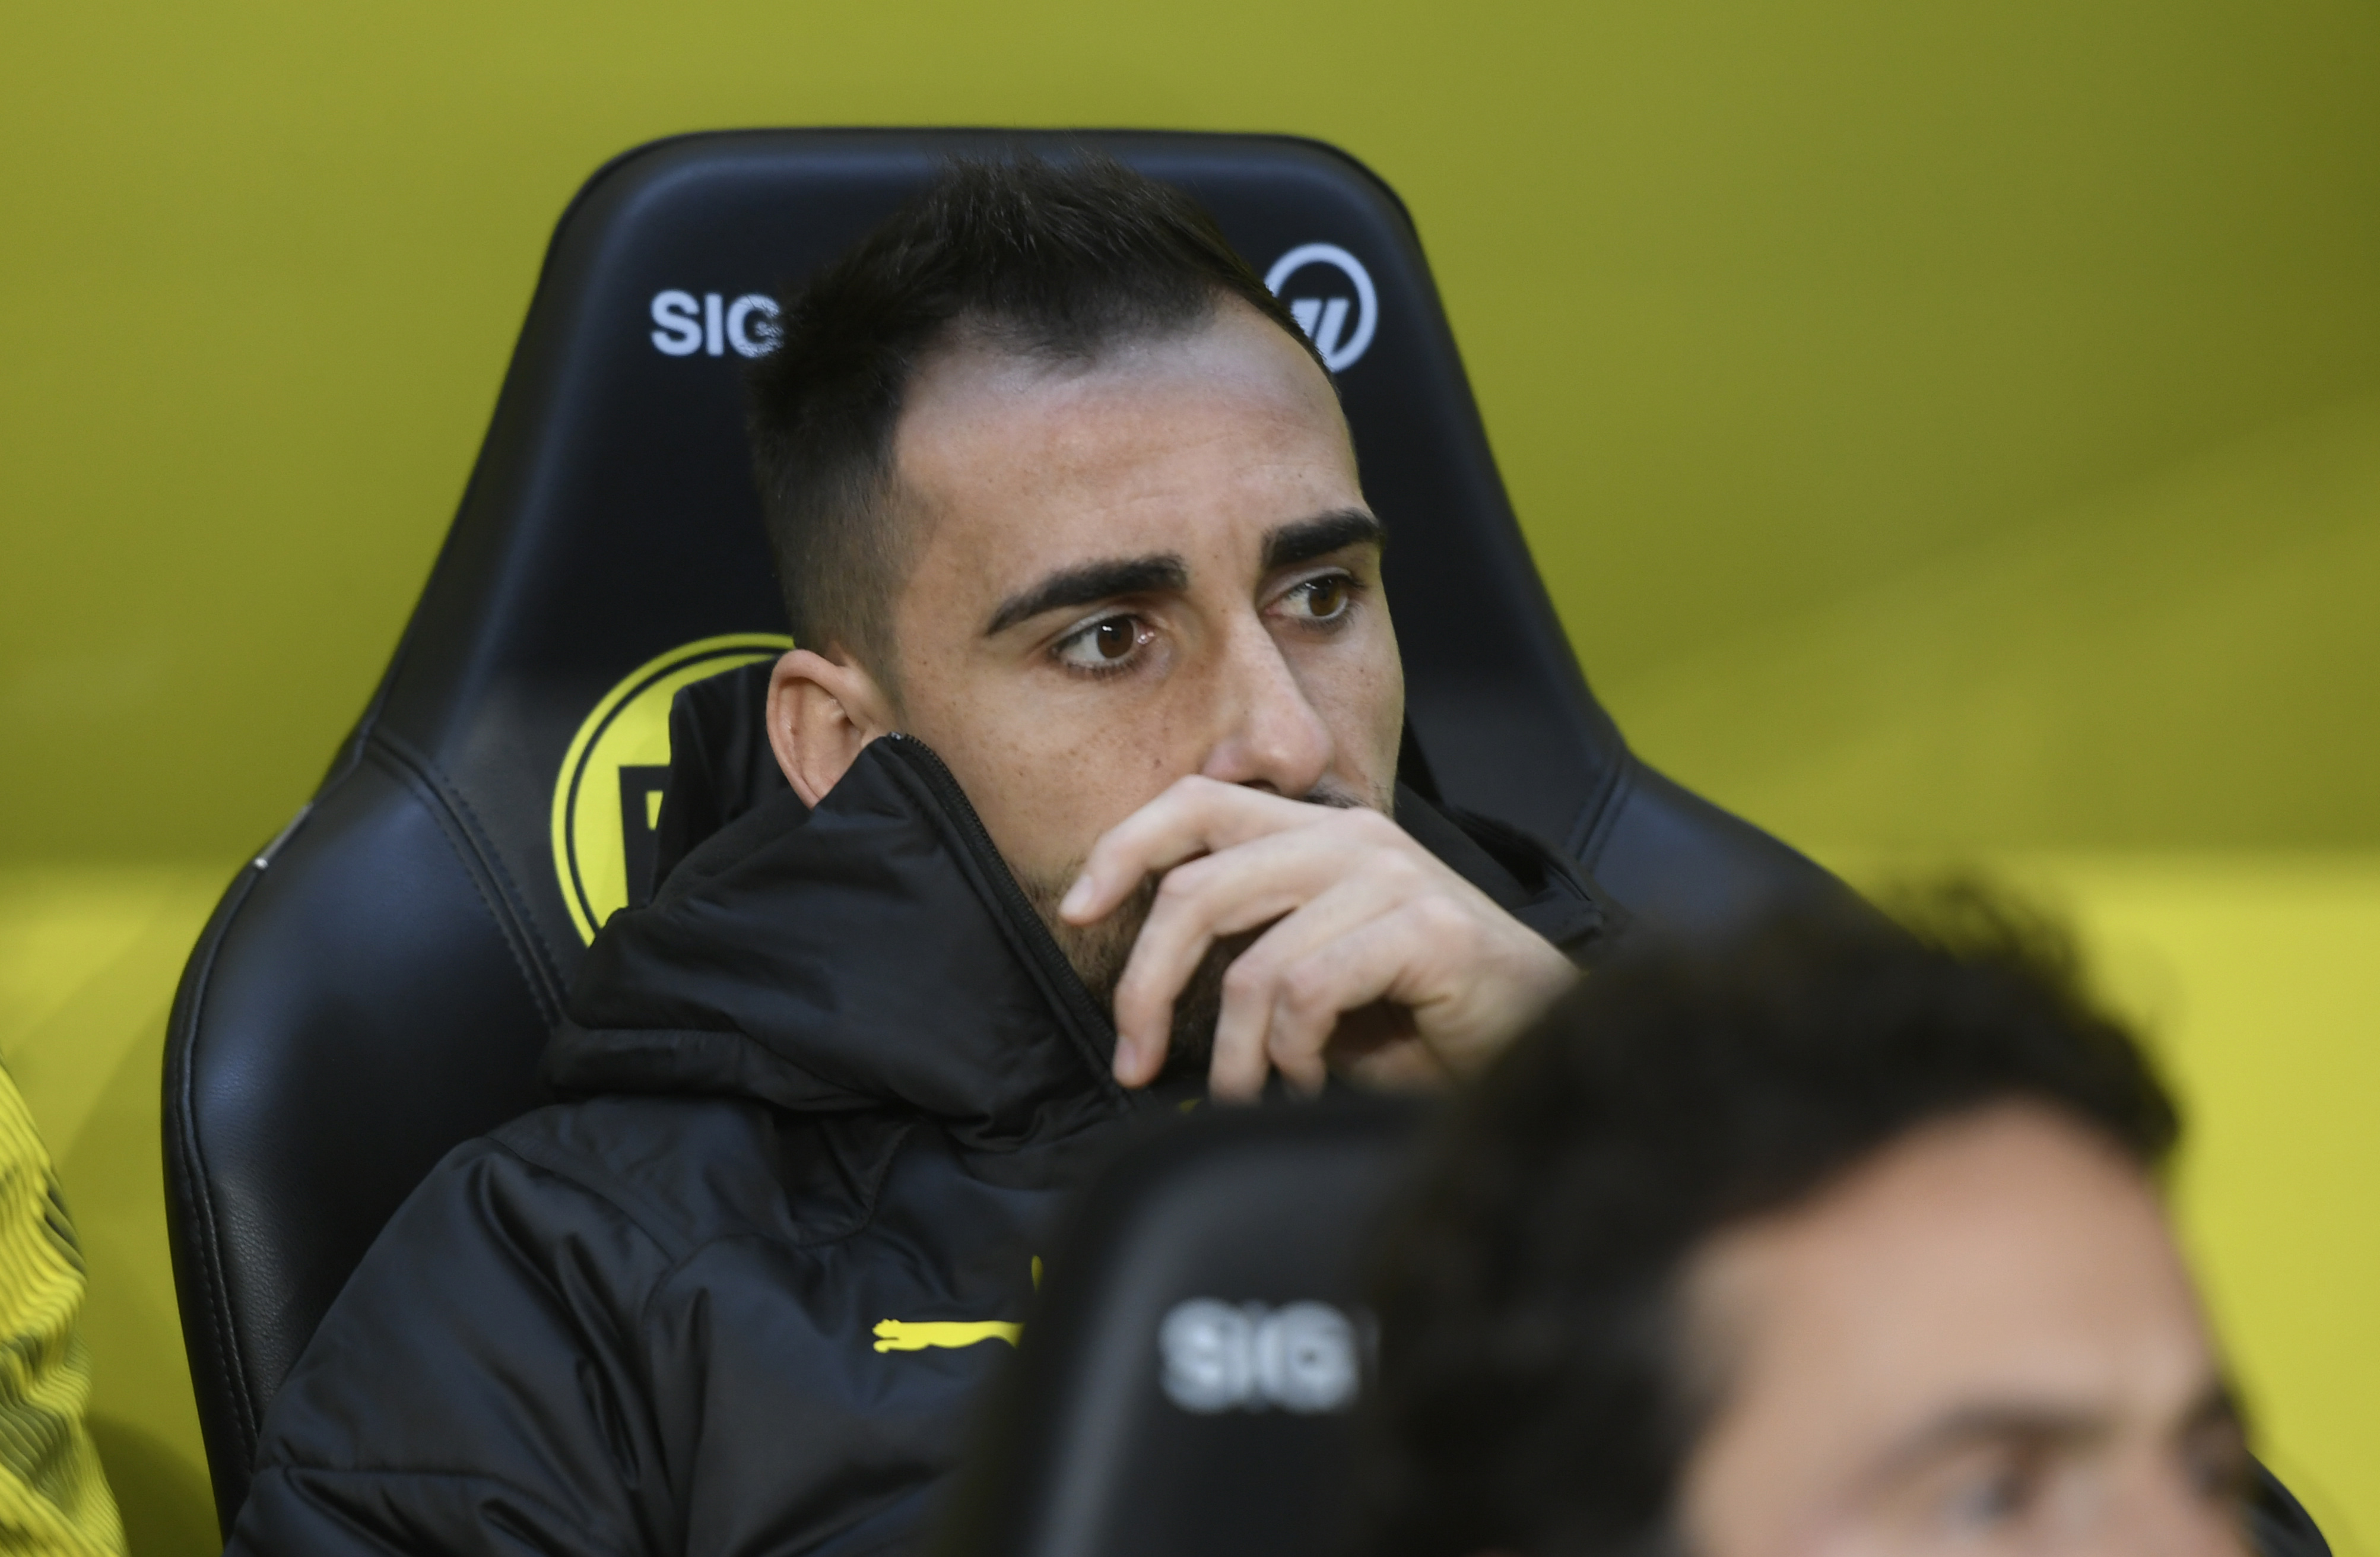 Dortmund's Spanish forward Paco Alcacer sits on the bench during during the German first division Bundesliga football match between Borussia Dortmund and VfL Wolfsburg on November 2, 2019 in Dortmund, western Germany. (Photo by INA FASSBENDER / AFP) / DFL REGULATIONS PROHIBIT ANY USE OF PHOTOGRAPHS AS IMAGE SEQUENCES AND/OR QUASI-VIDEO (Photo by INA FASSBENDER/AFP via Getty Images)